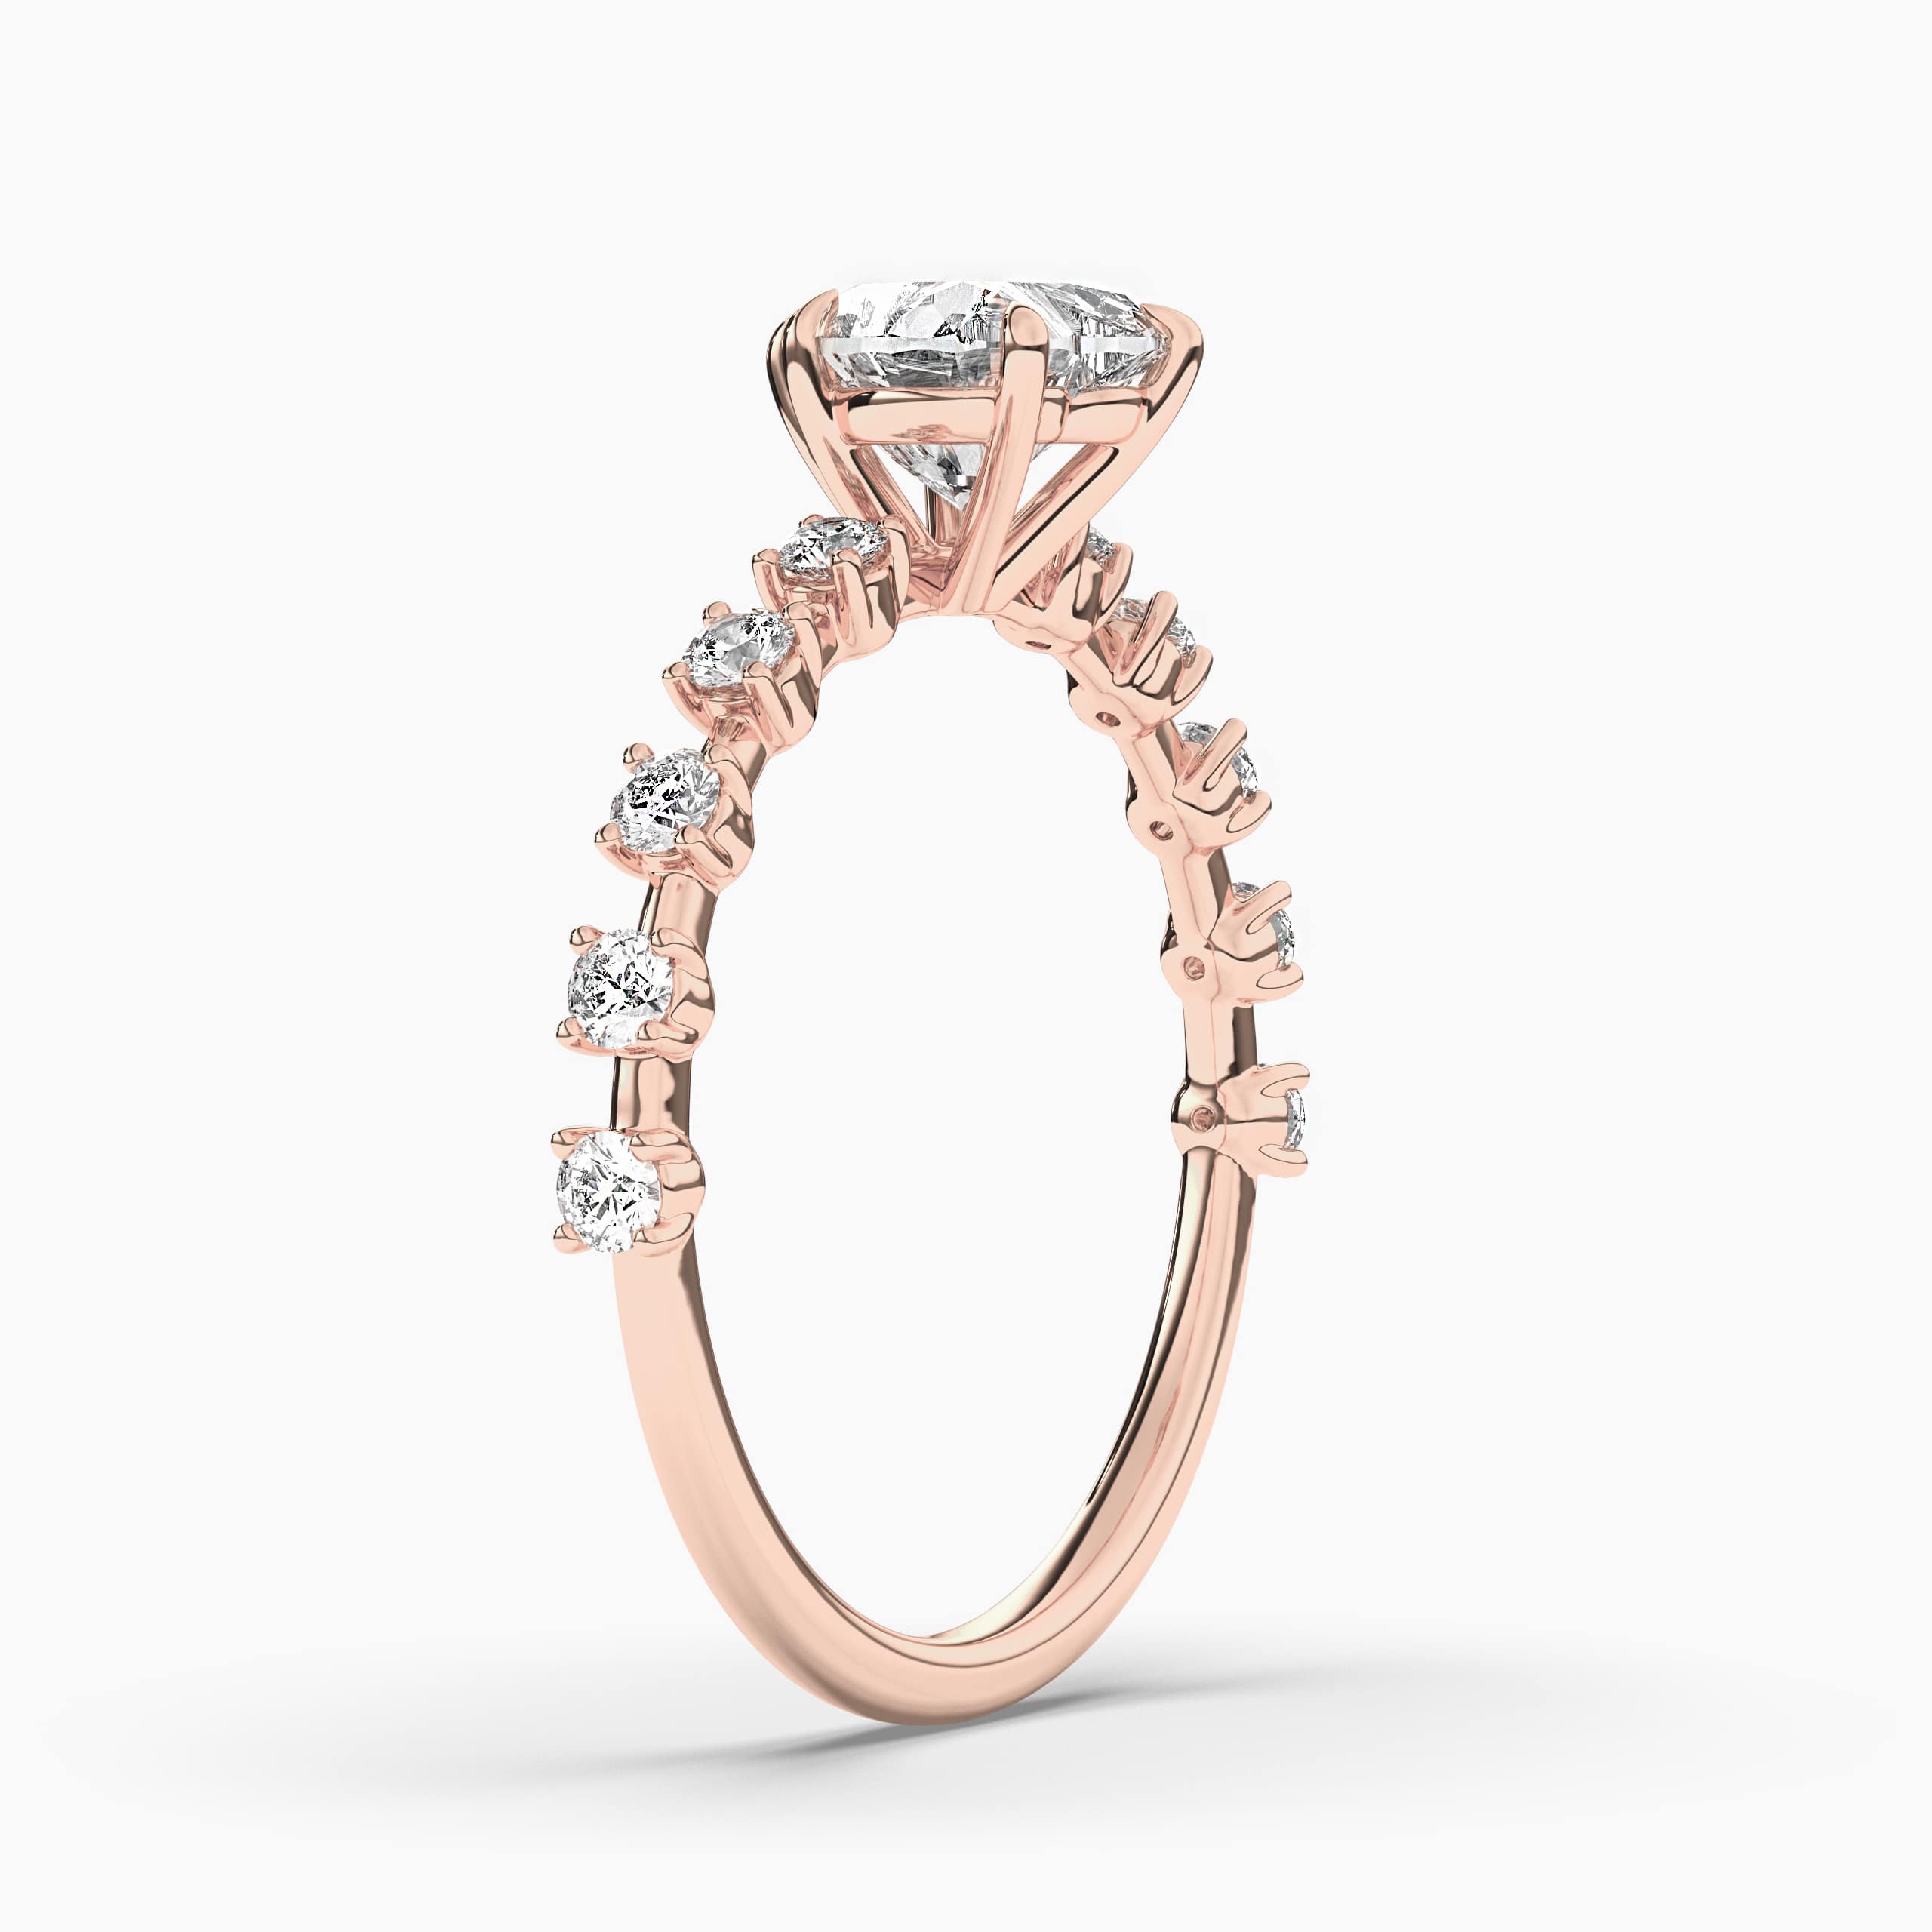 ruby engagement ring set rose gold heart shaped rings